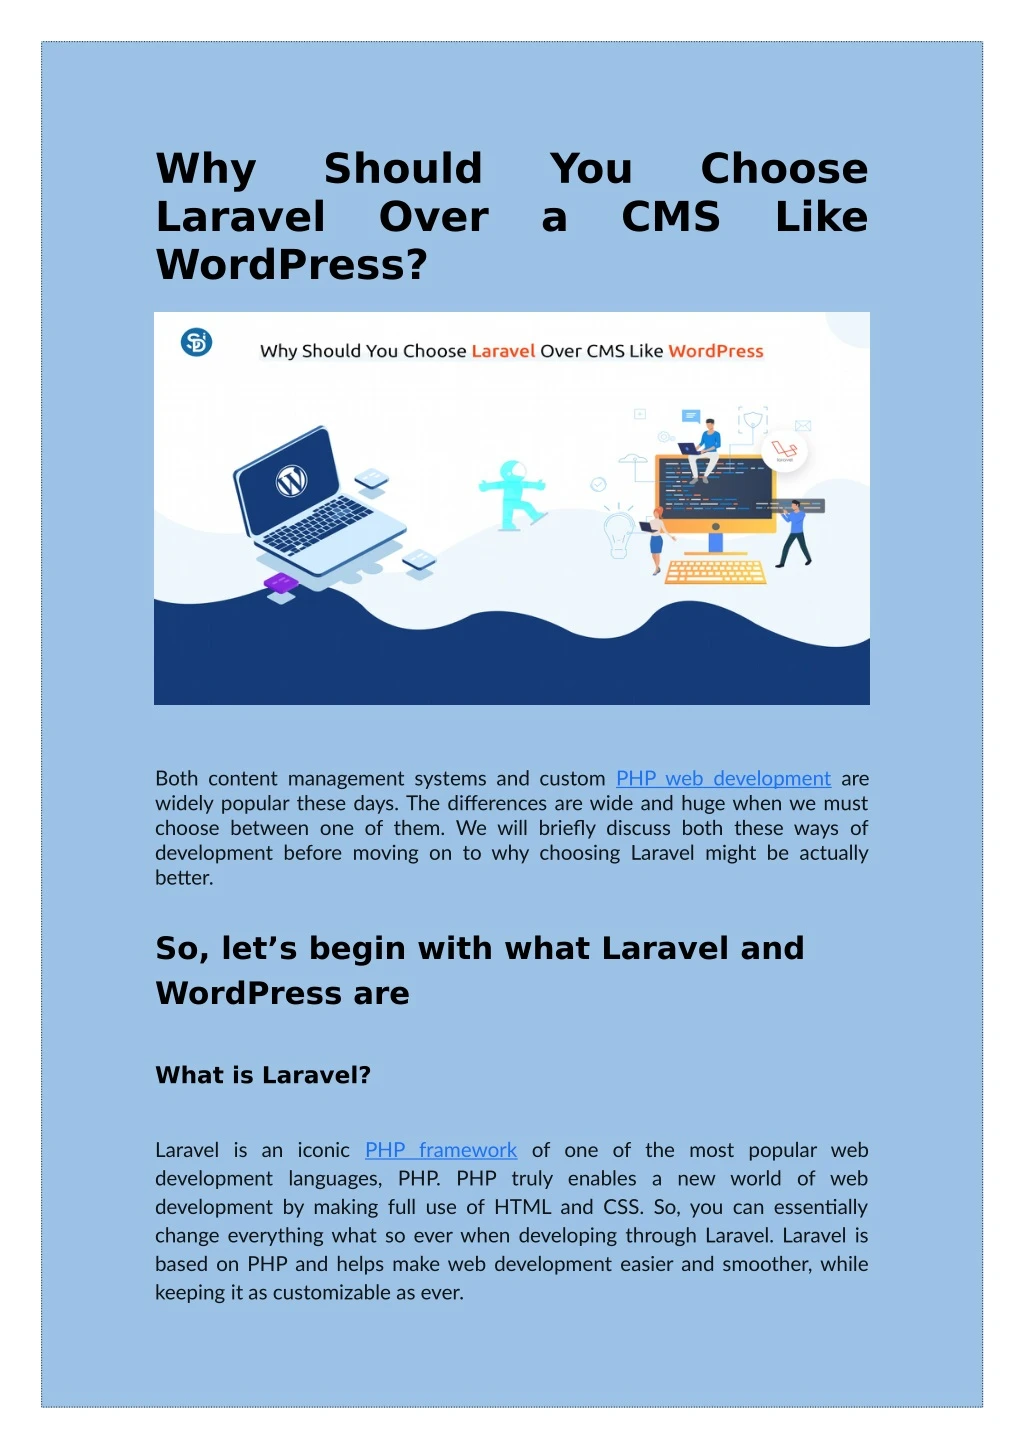 why should you choose laravel over a cms like